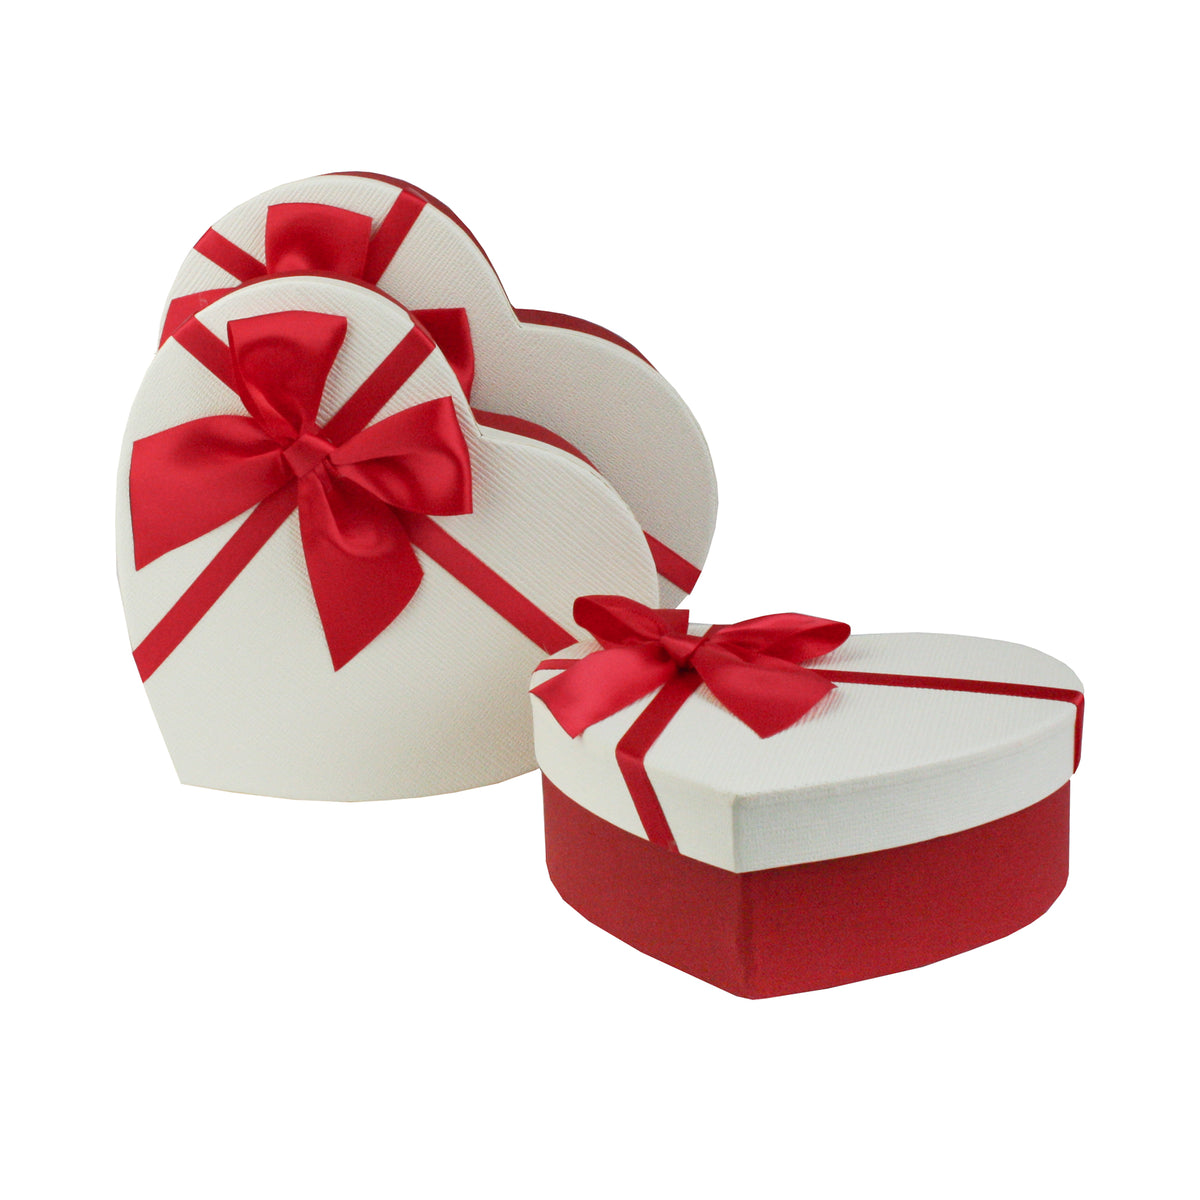 Set of 3 Red/White Gift Boxes with Red Satin Ribbon (Sizes Available)